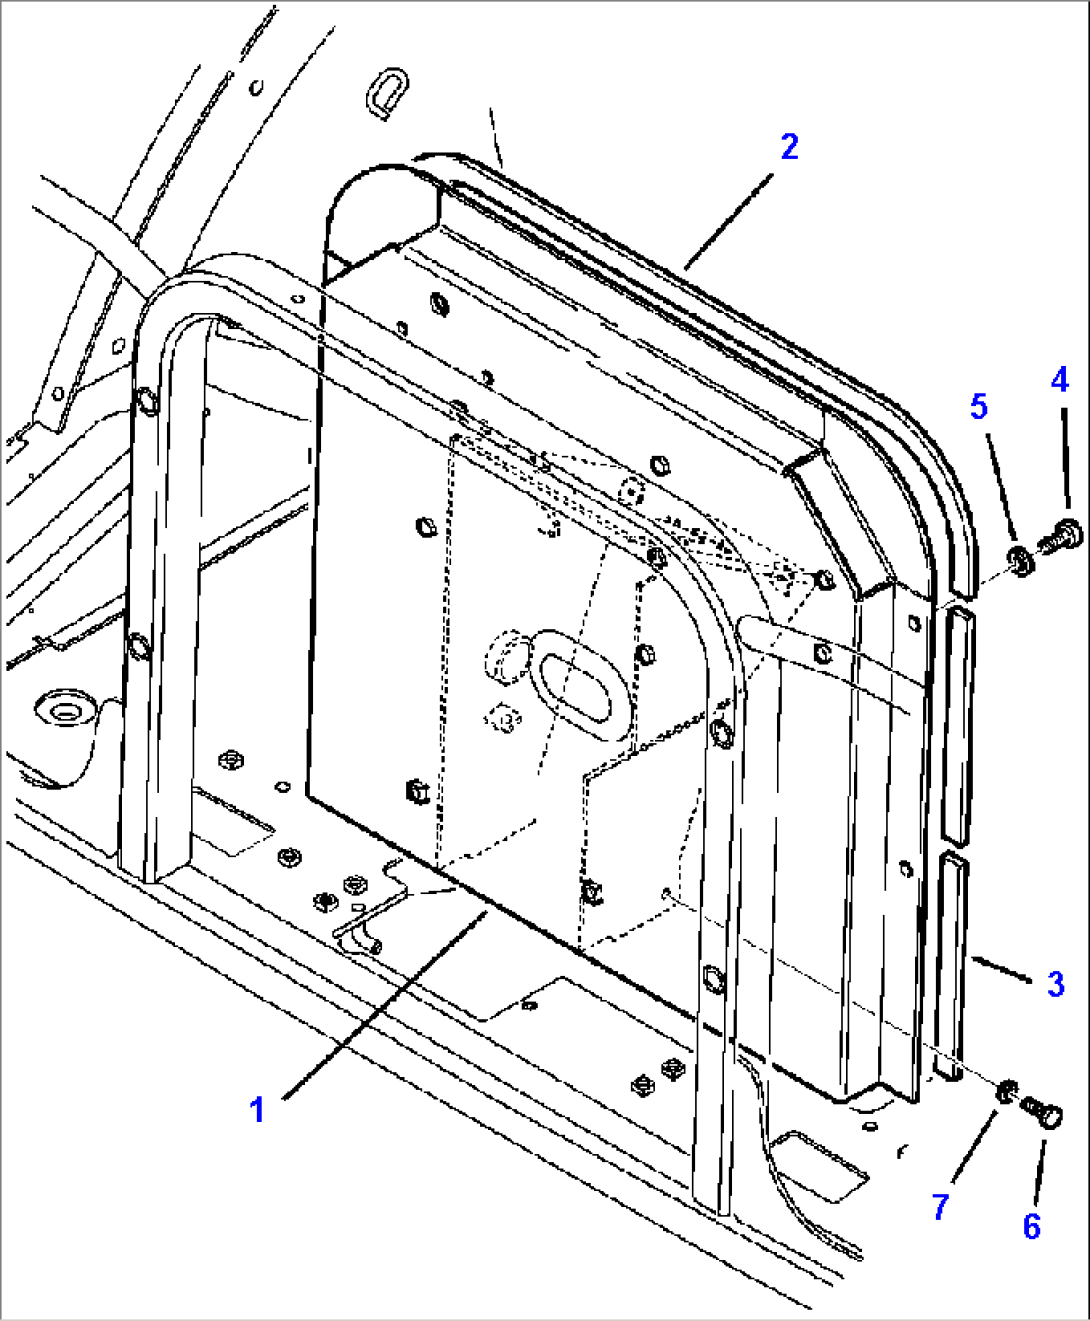 K5012-01A0 CAB WITH AIR CONDITIONING FRONT FRAME